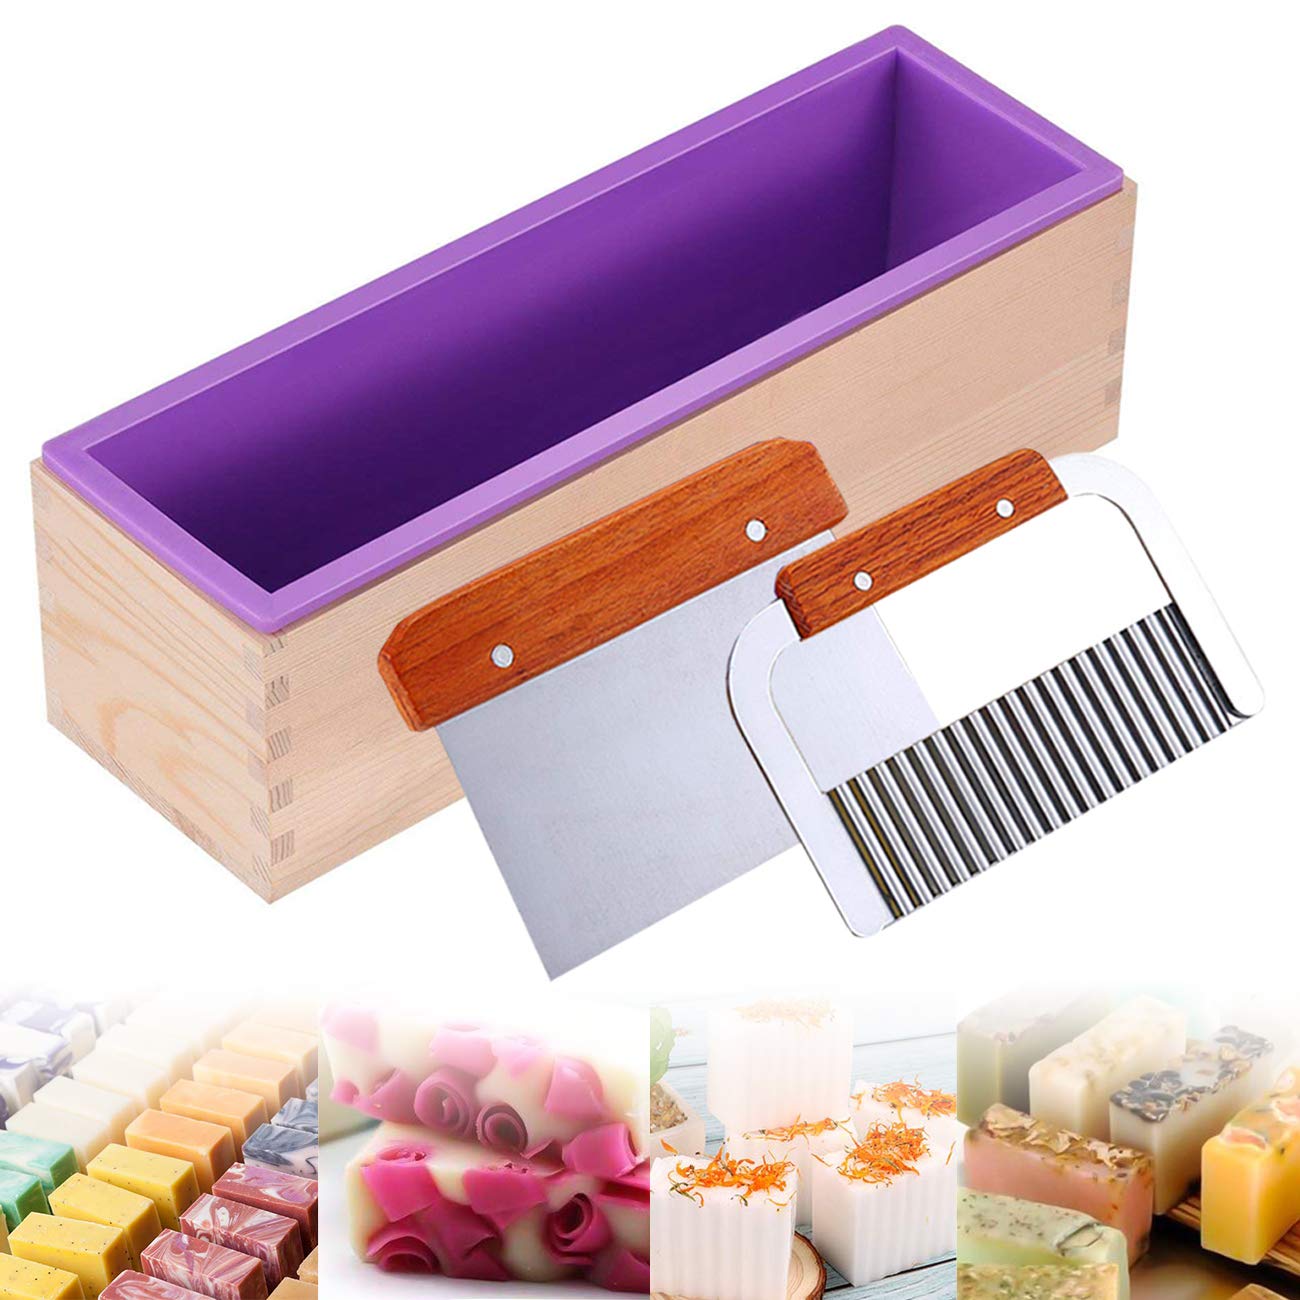 Ogrmar Silicone Soap Molds Kit-42 oz Wooden Silicone Soap Rectangular Mold with Stainless Steel Wavy &#x26; Straight Scraper for Soap Cake Making (Purple)